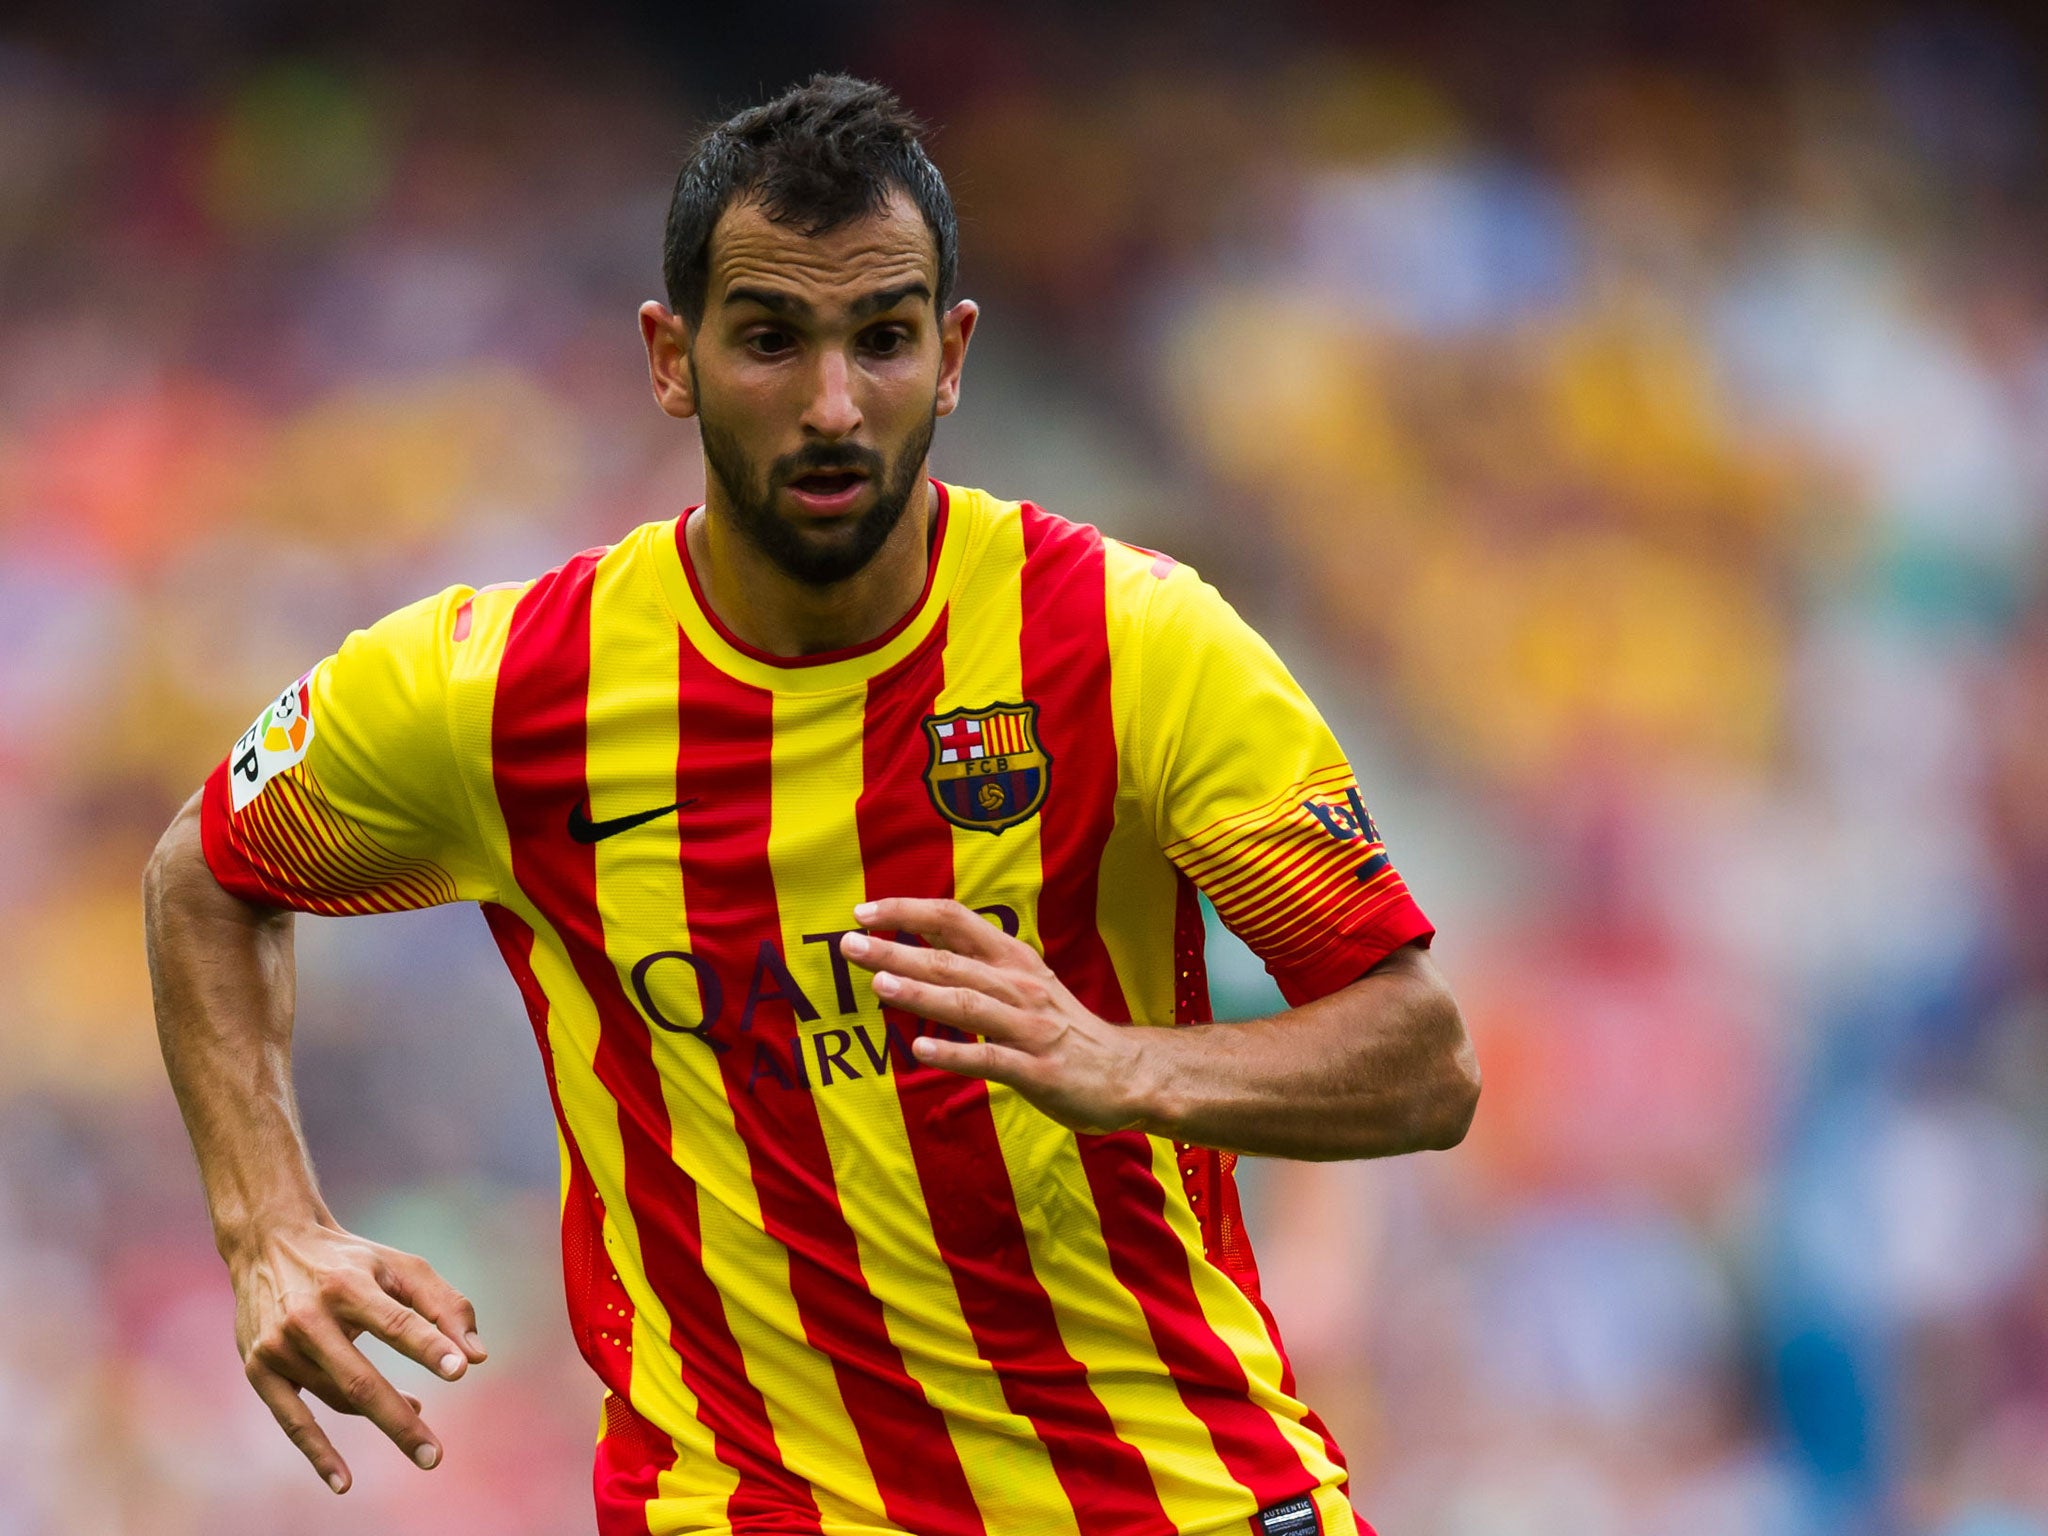 Martin Montoya during his only Barcelona appearance this season - starting in the 2-0 La Liga win over Athletic Bilbao